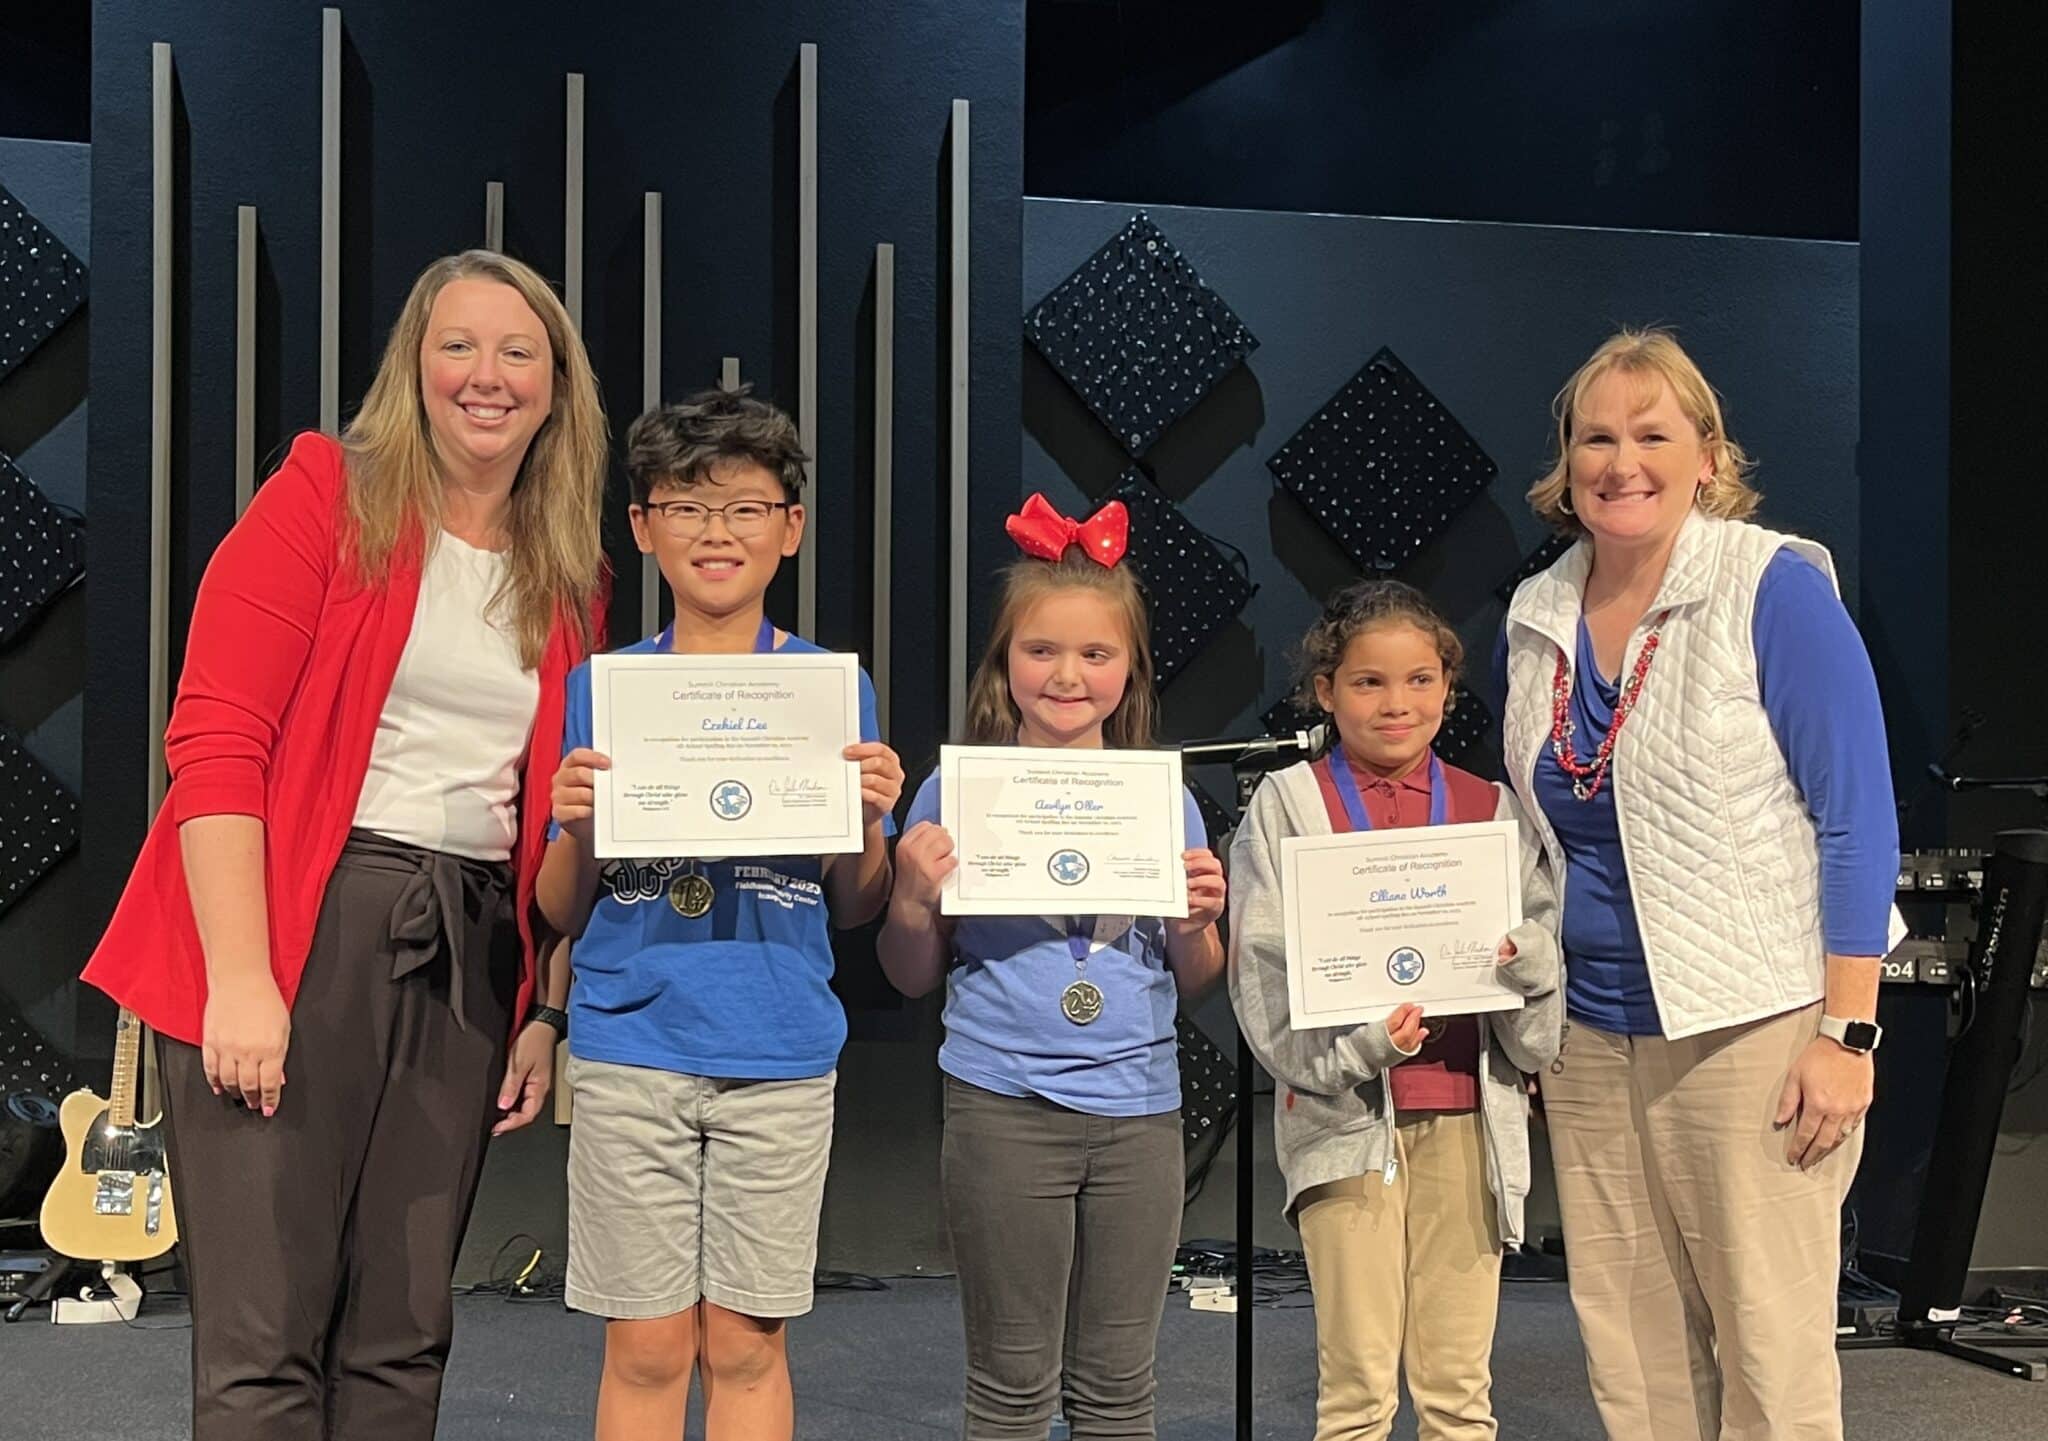 SCA is proud of the hard work and achievement of 45 students who participated in the annual SCA spelling bee. Pictured here (left to right) are SCA Upper Elementary Principal Dr. Julie Madsen, first place winner Ezekiel Lee, second place winner Aevlyn Oller, third place winner Elliana Worth, and SCA Early Education and Lower Elementary Principal Charissa Sanders.